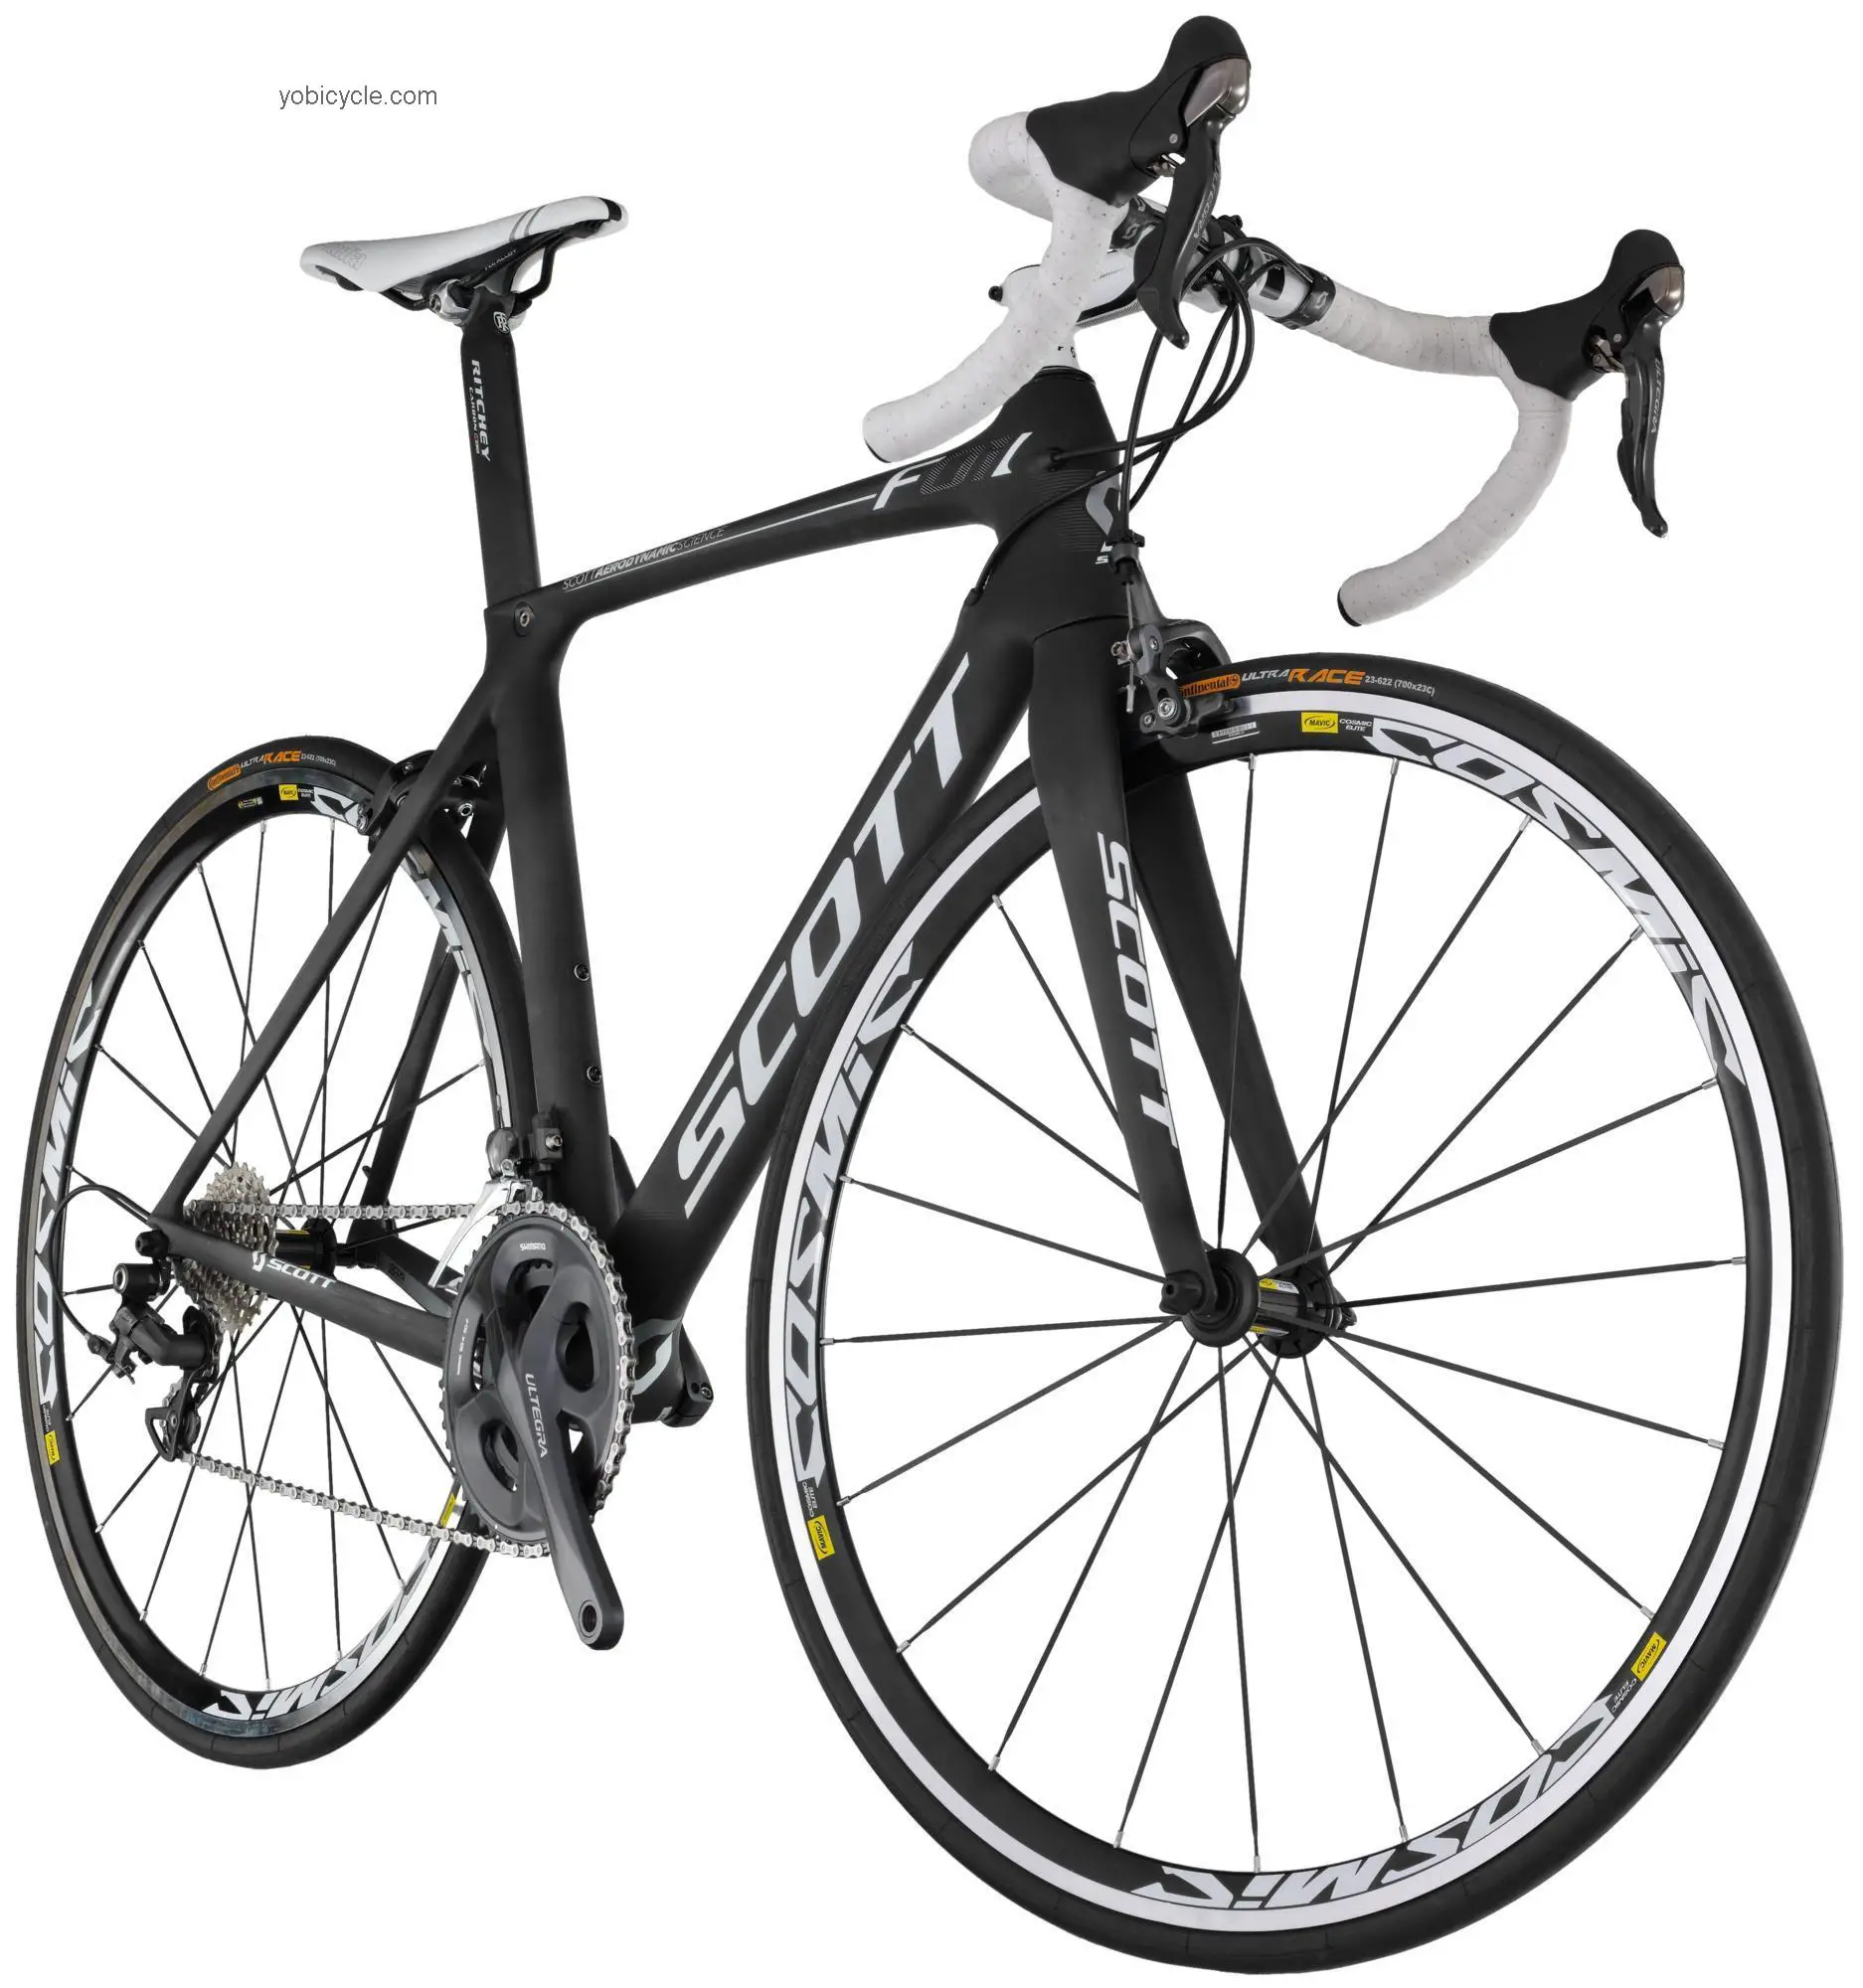 Scott  Foil 20 Technical data and specifications